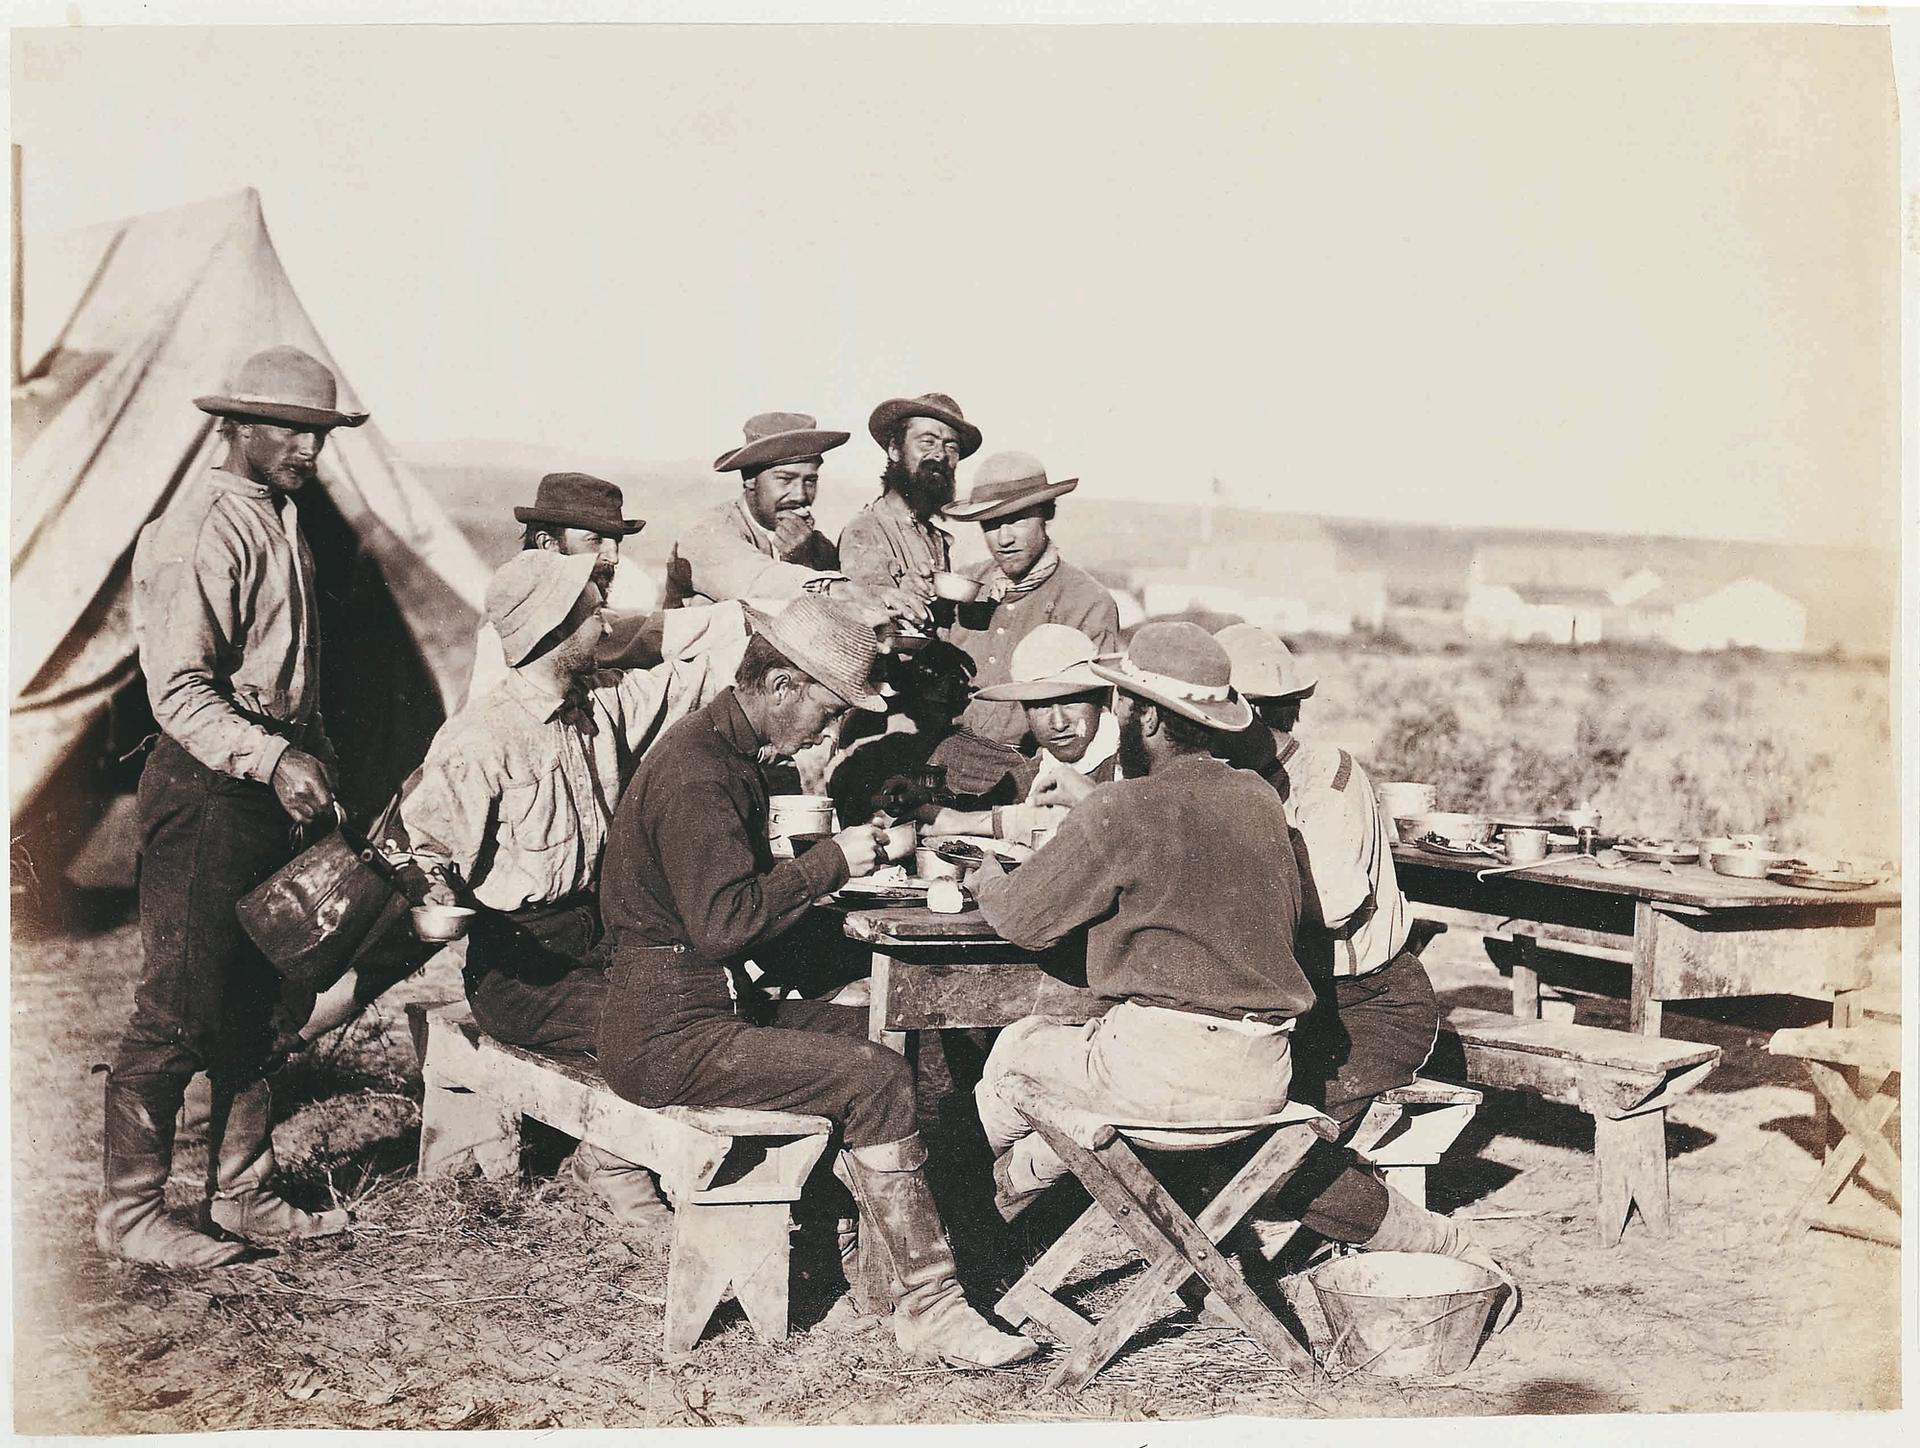 William Henry Jackson, photograph of various members of the fourth Great Survey of the American West (1871), exploring what became Yellowstone National Park © Société de Géographie